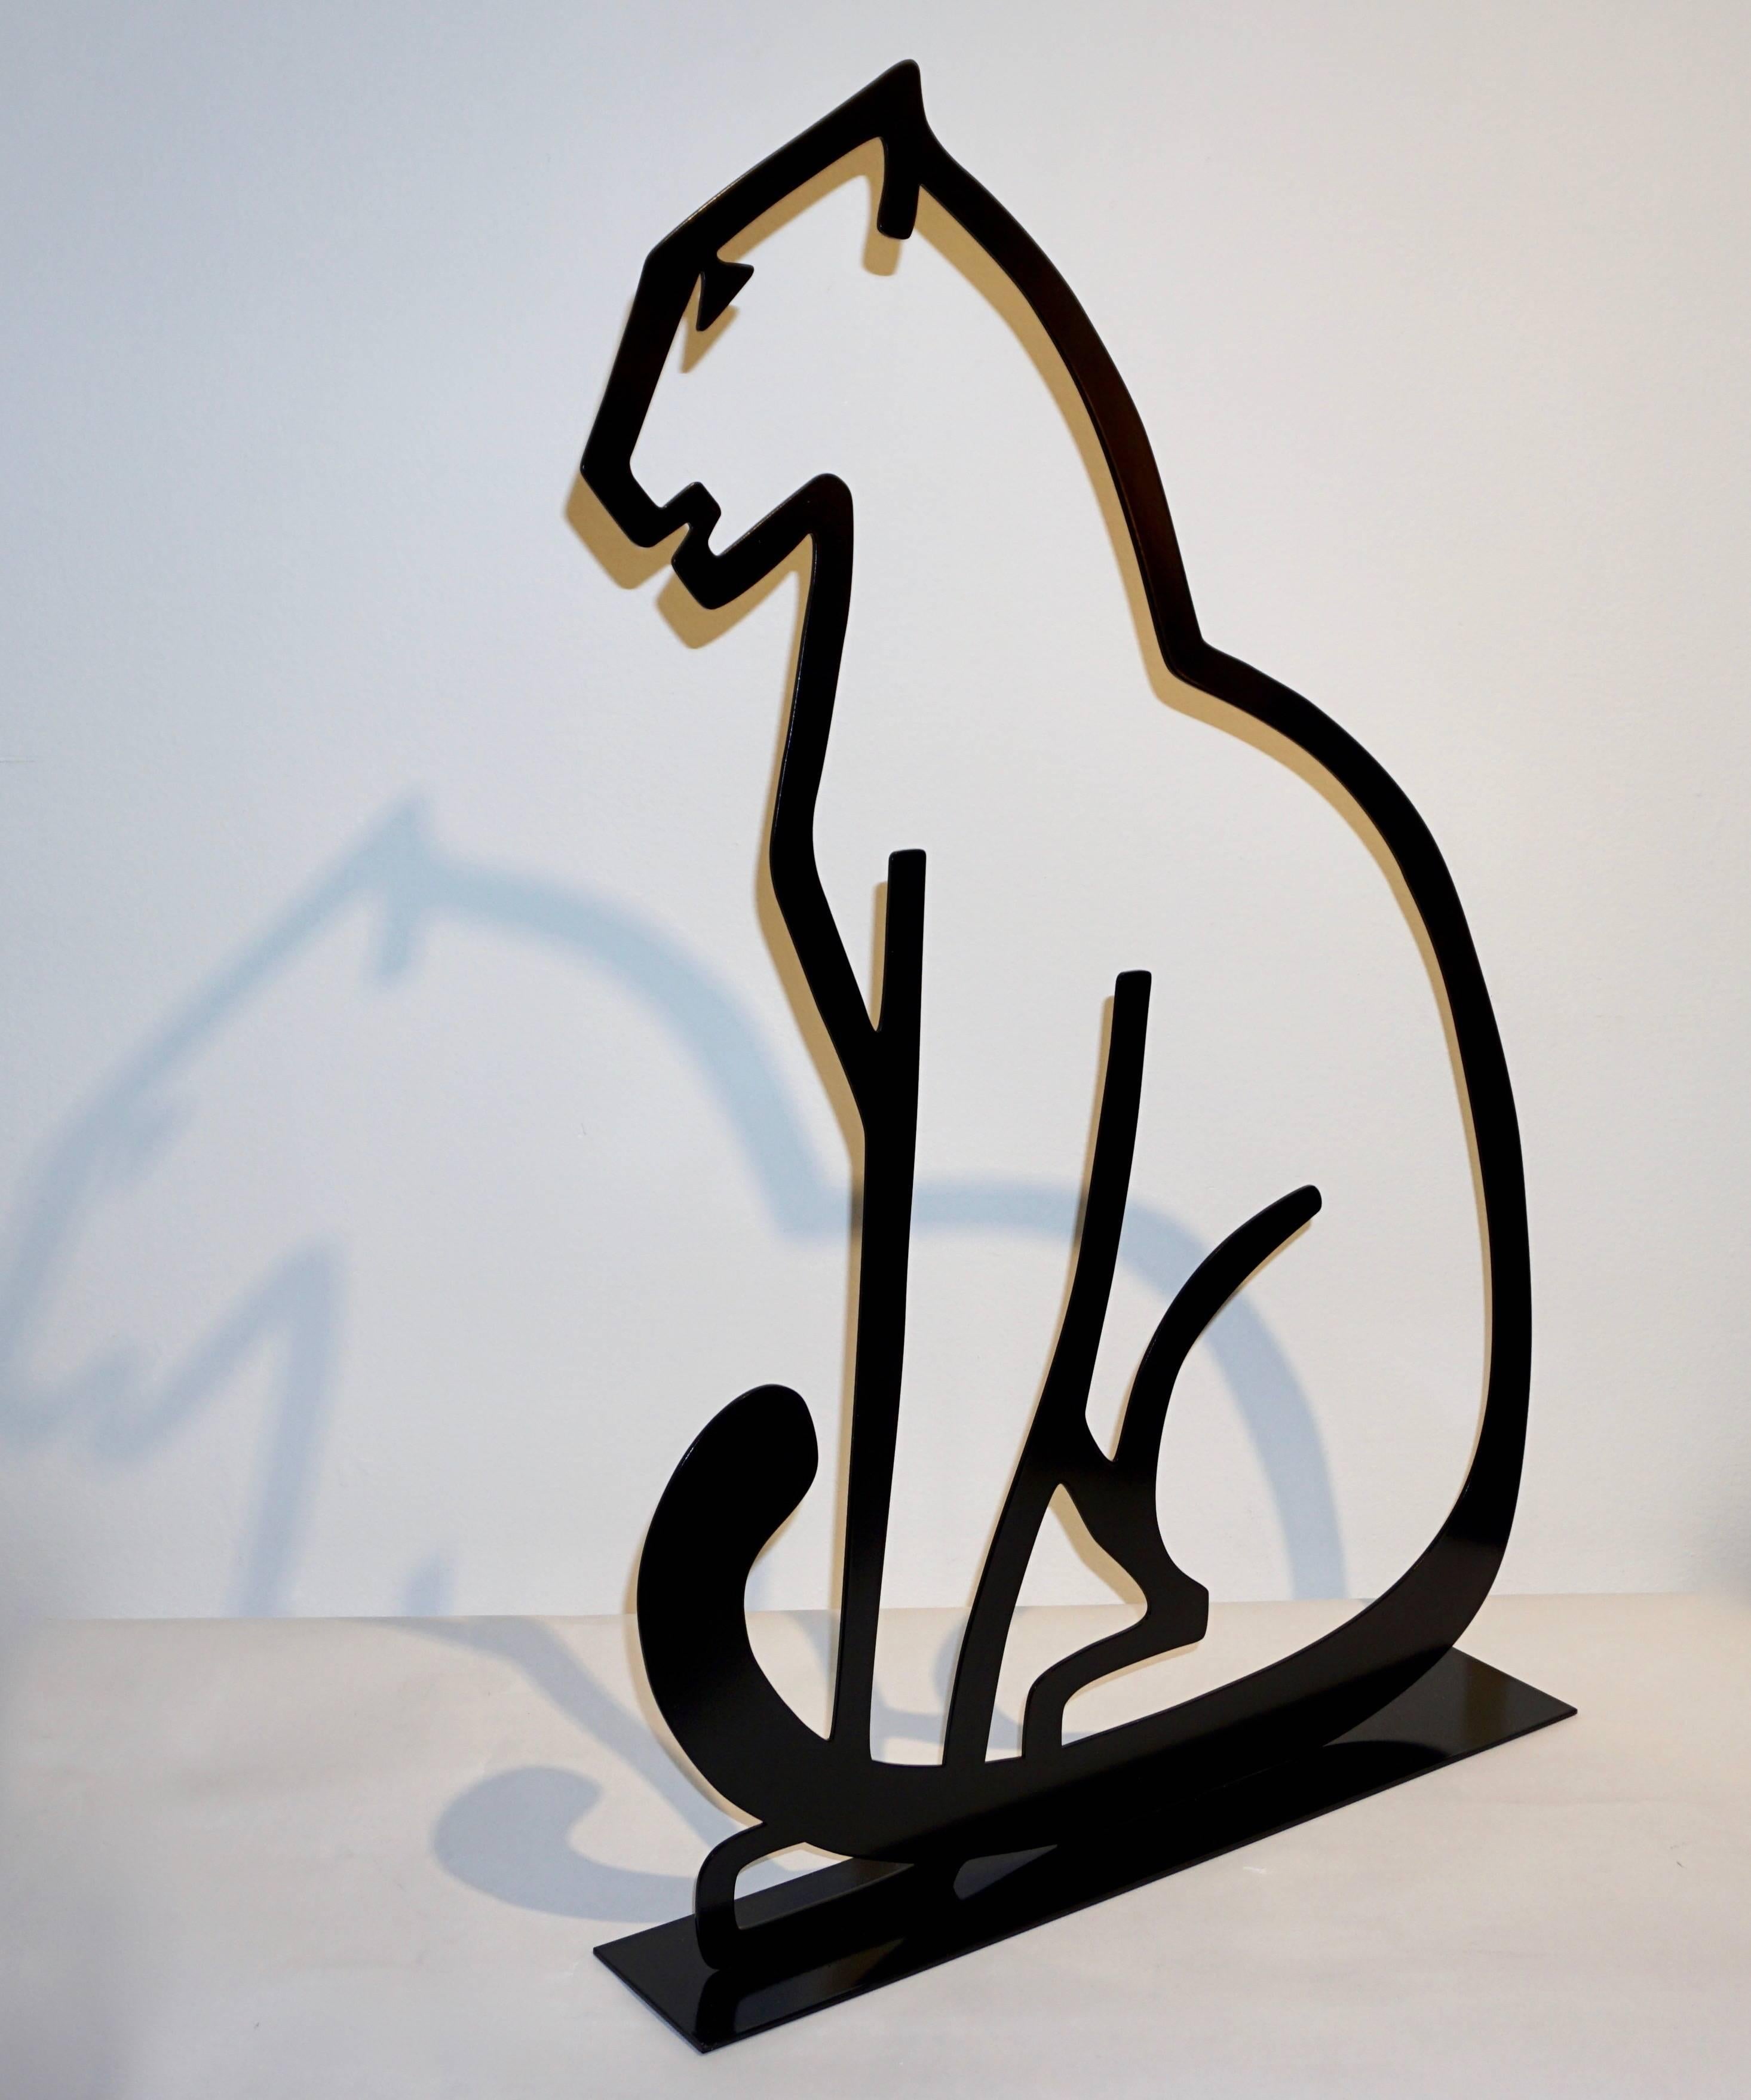 A chic decorative tall metal cut sculpture of organic modern design, depicting a Minimalist panther silhouette, in black lacquered iron, supported by a geometric base. The fine open design creates playful shadows that add depth to this decorative